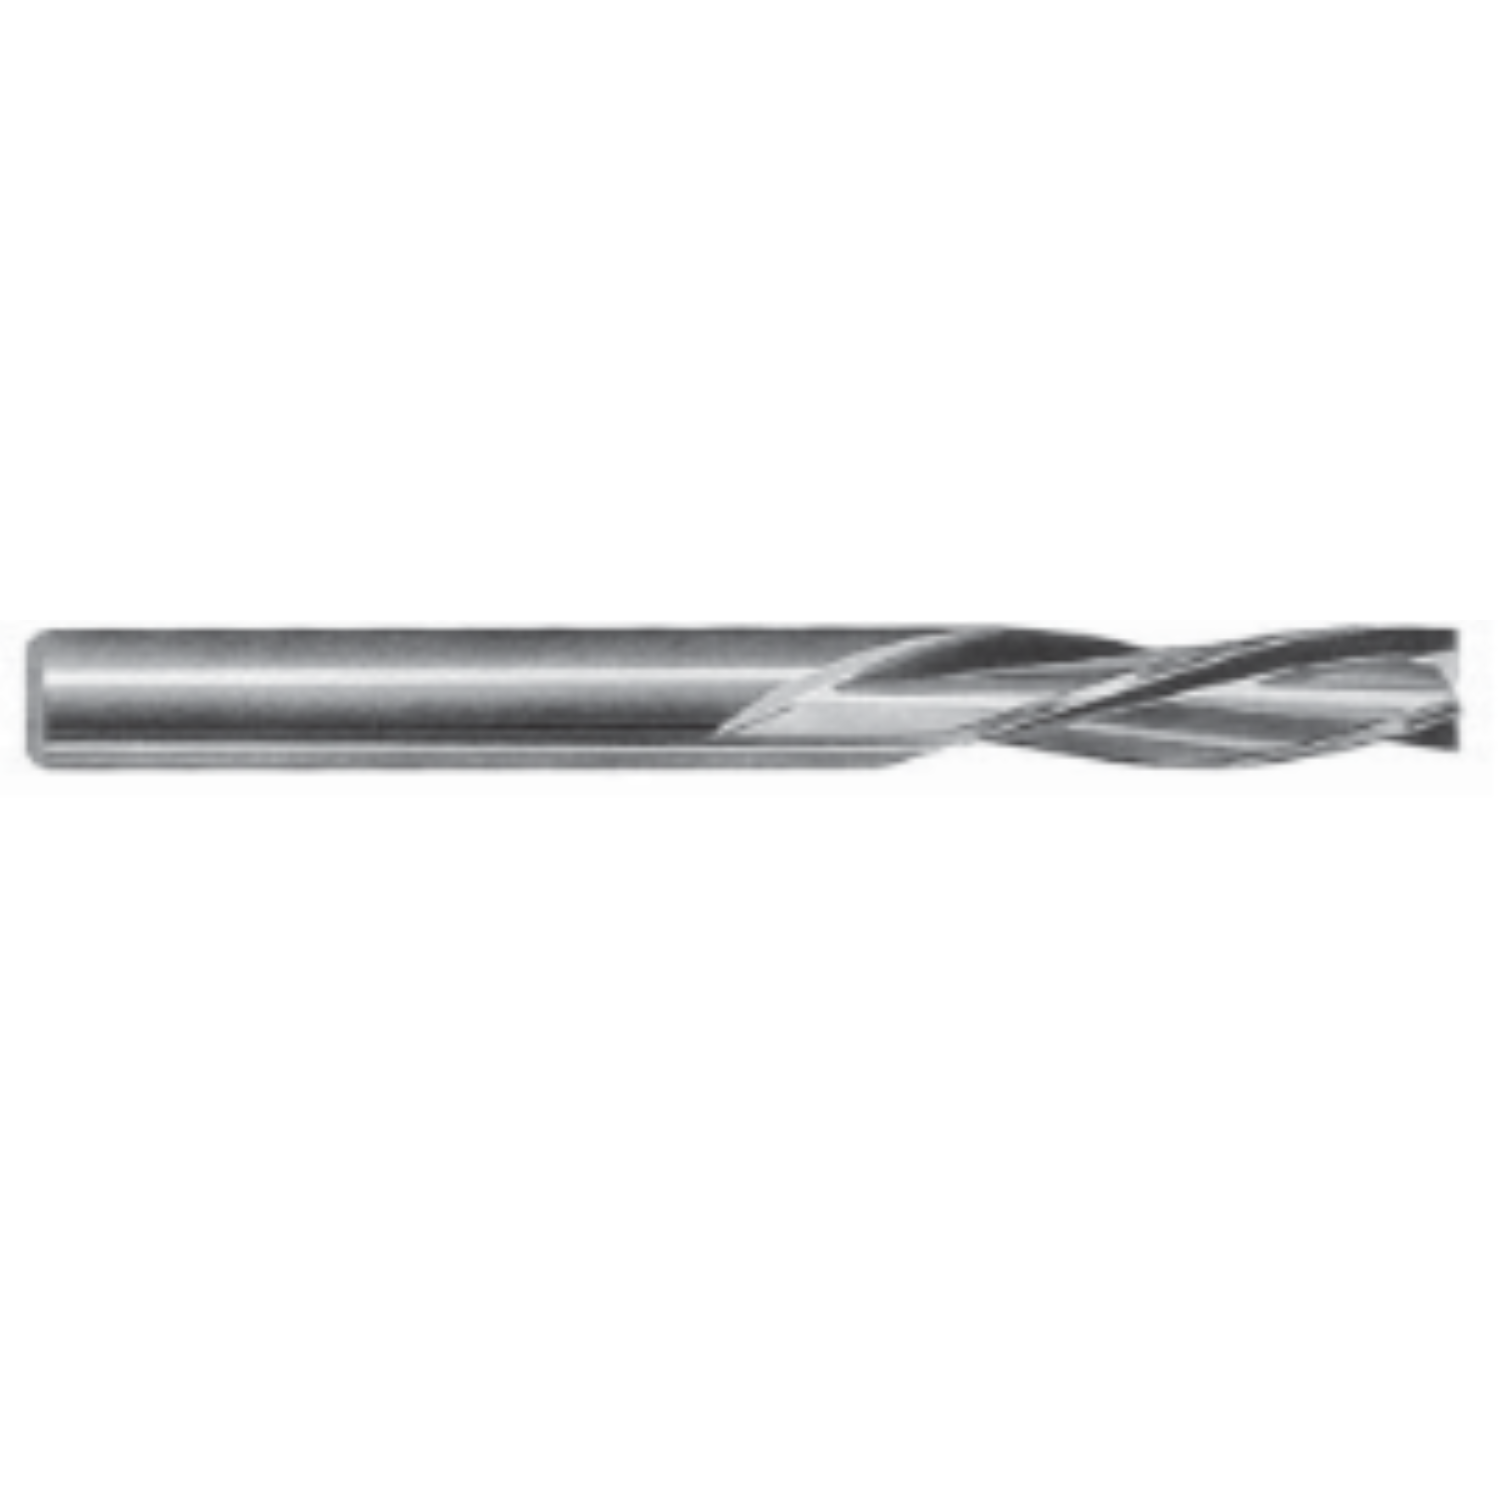 YEW AIK Series 259 Spiral Flute r.h. Three Flute Routers - Premium Three Flute Routers from YEW AIK - Shop now at Yew Aik.